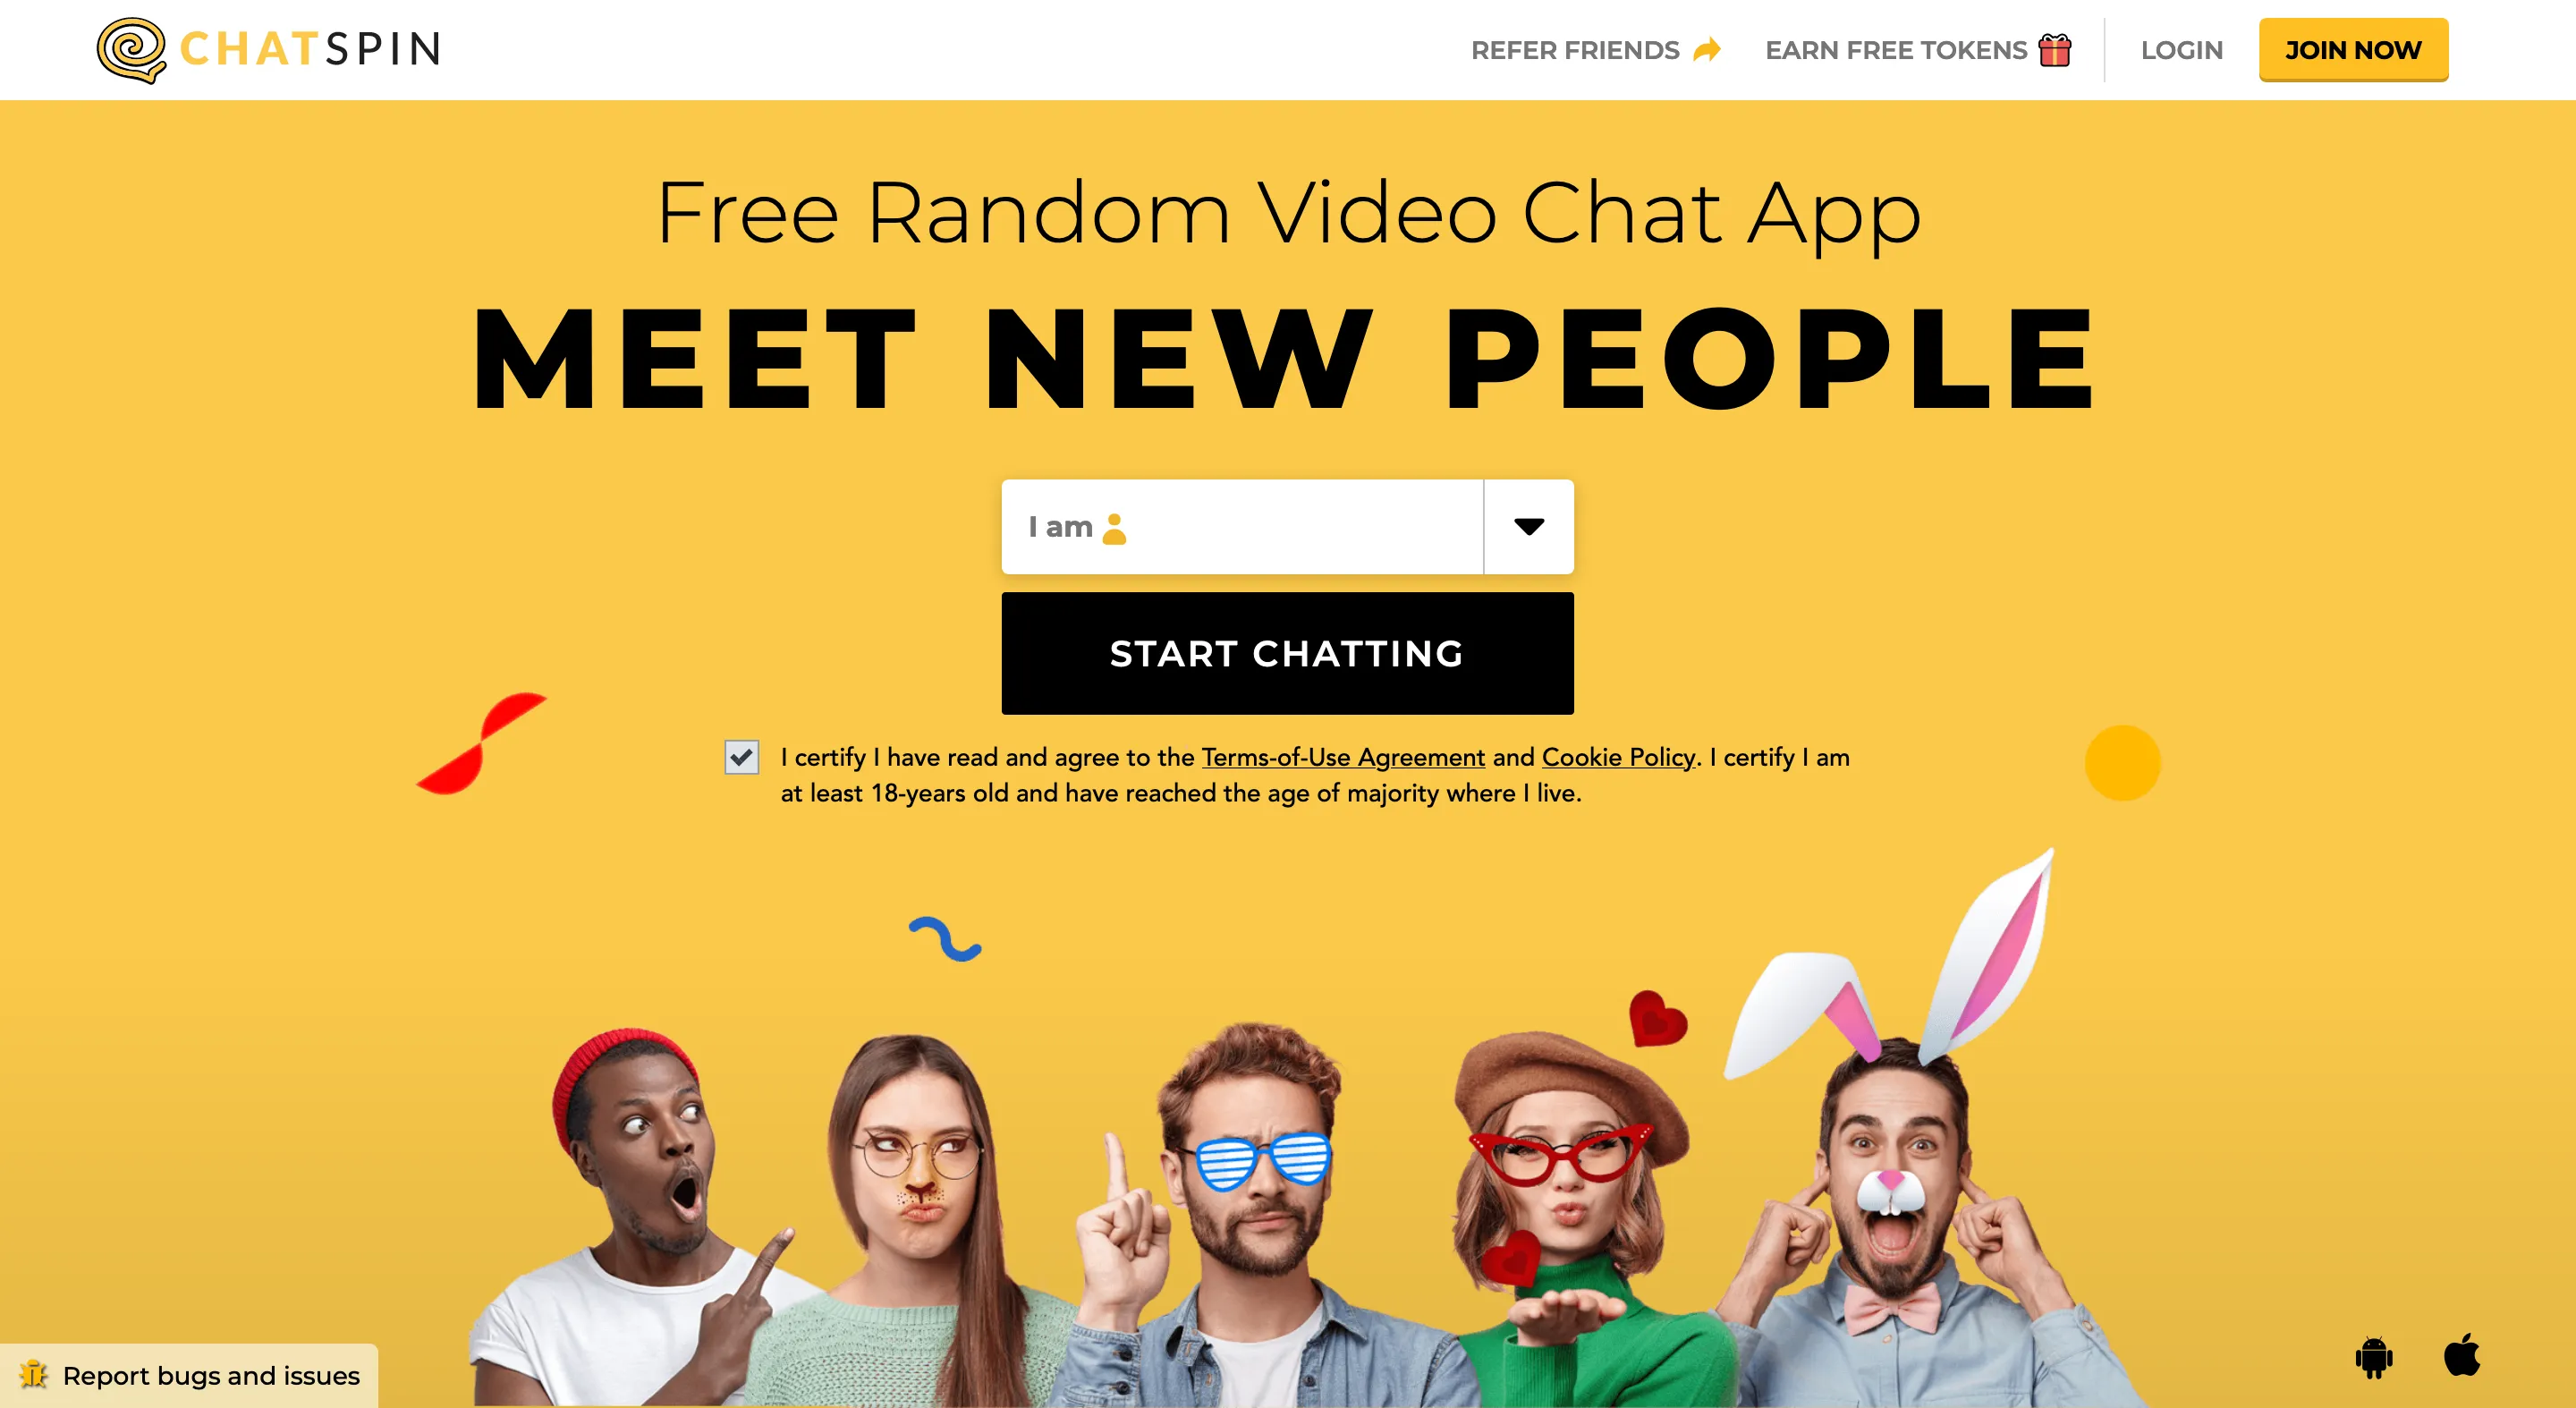 Happy yellow Chatspin community! I'm all smiles video chatting with fun new people across the globe. Come join our 1 billion strong conversation - it's free, easy and crazy entertaining meeting random friendly strangers. Chatspin brings good vibes and good times.